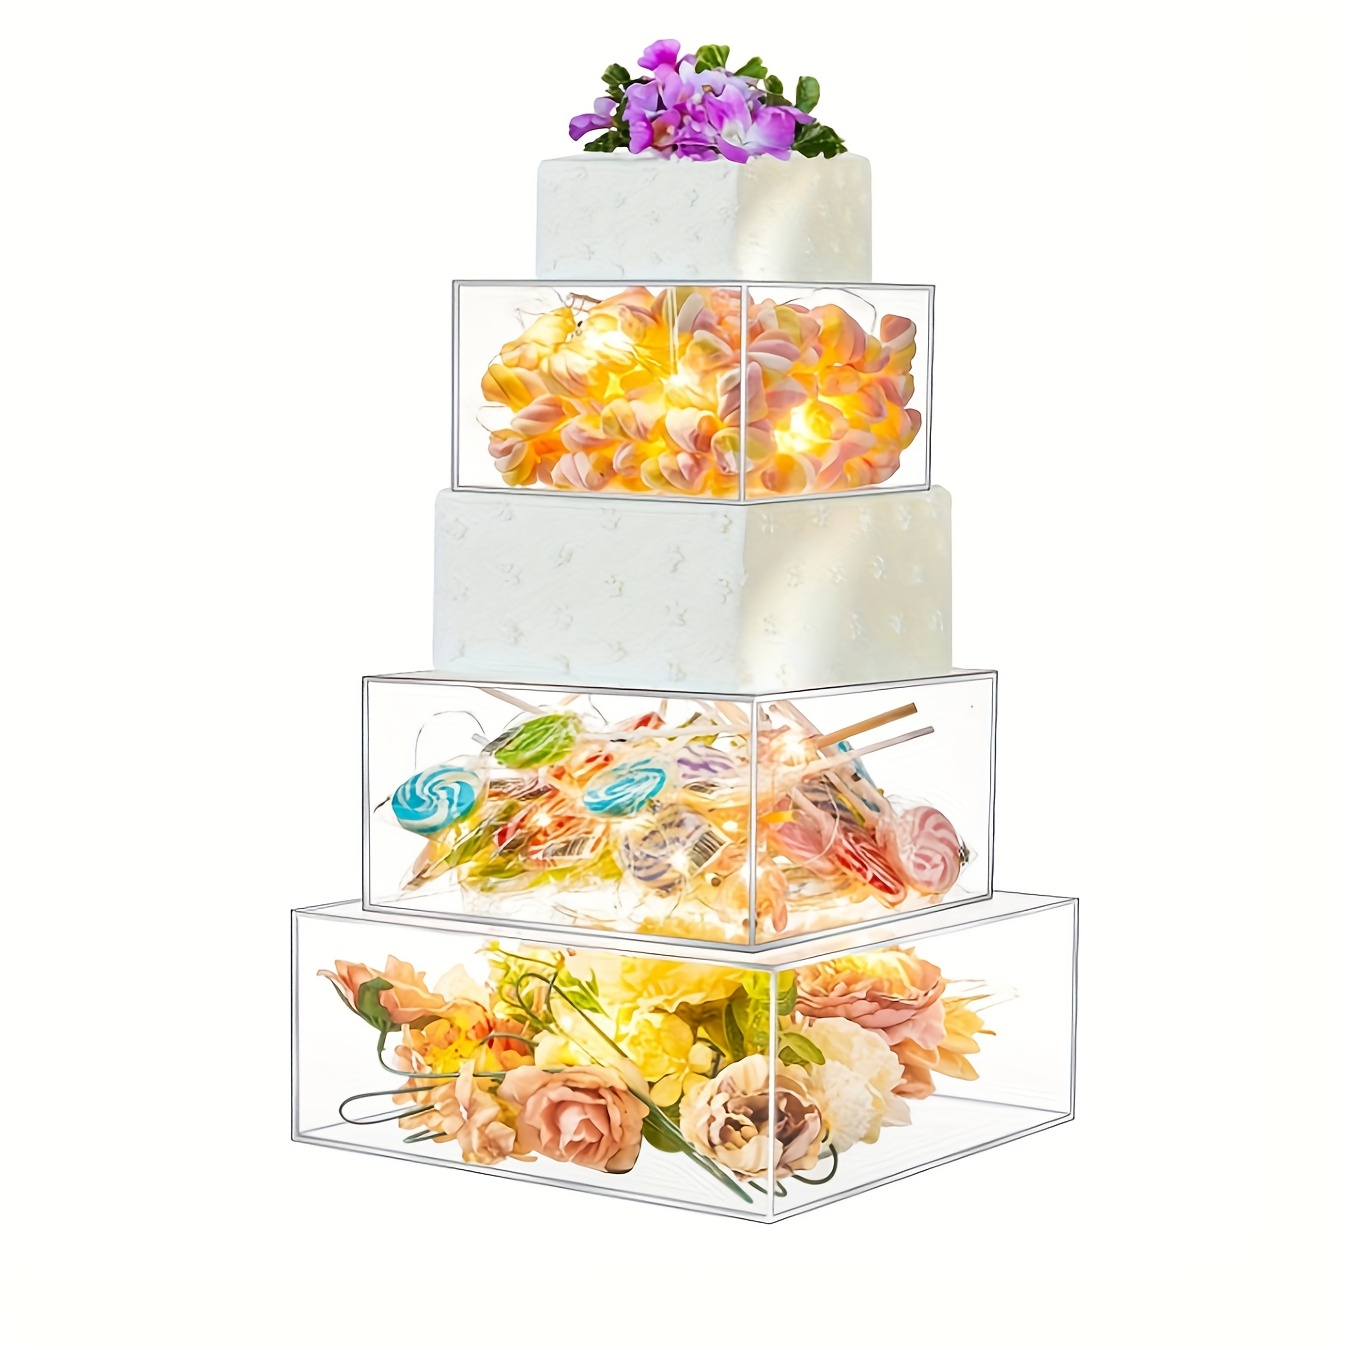 3-in-1 Acrylic Cake Stand with Dome Cover Lid, Packaging Type: Box